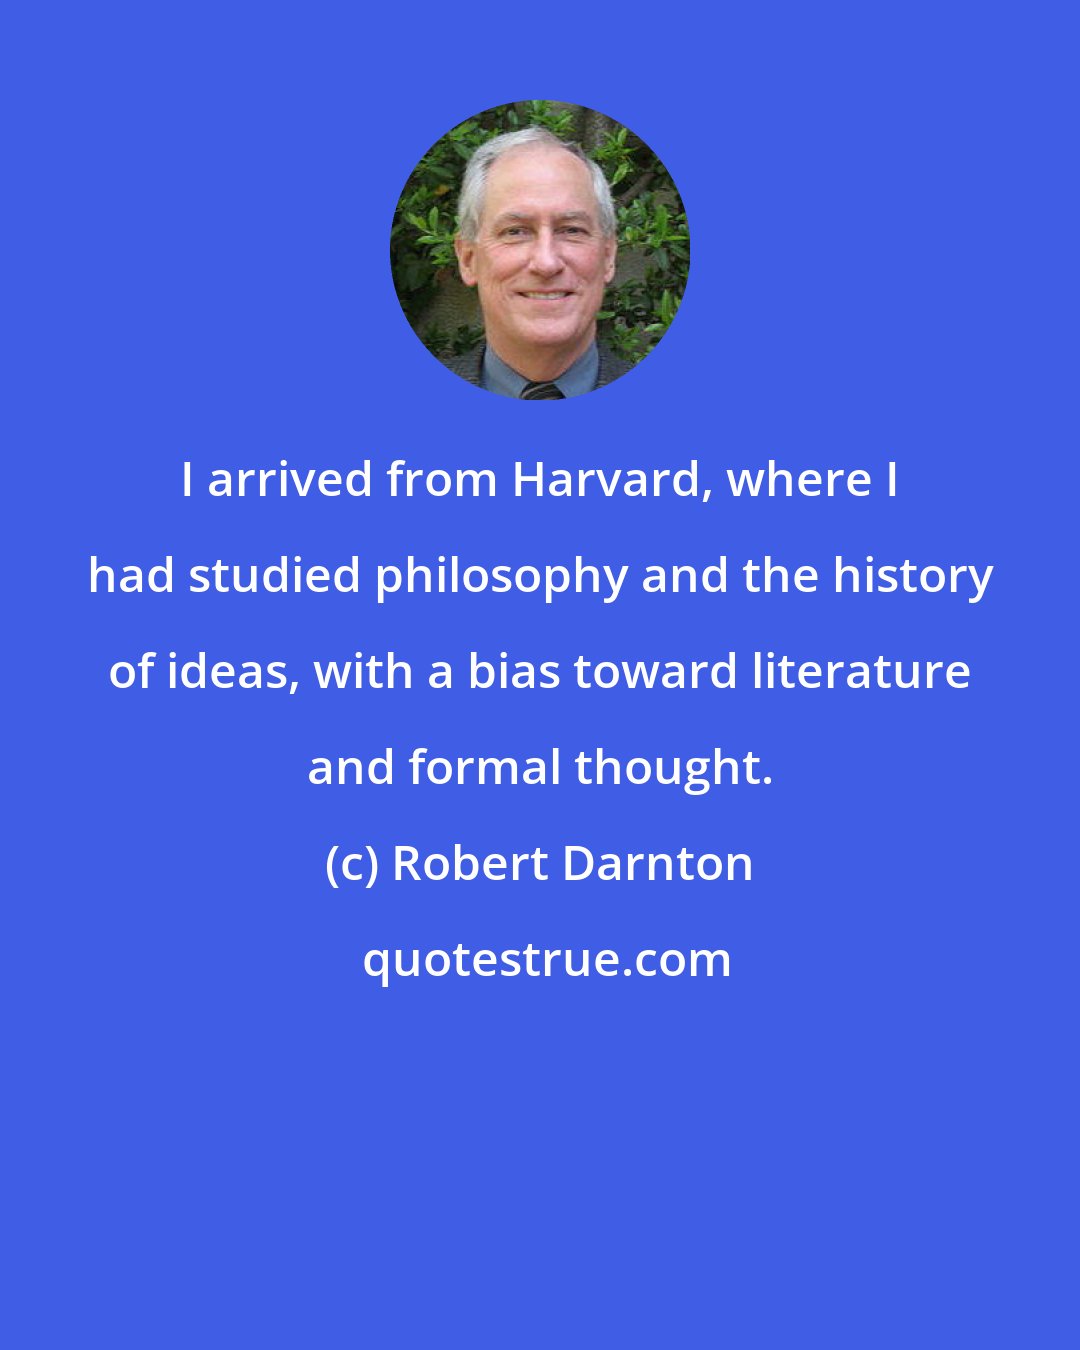 Robert Darnton: I arrived from Harvard, where I had studied philosophy and the history of ideas, with a bias toward literature and formal thought.